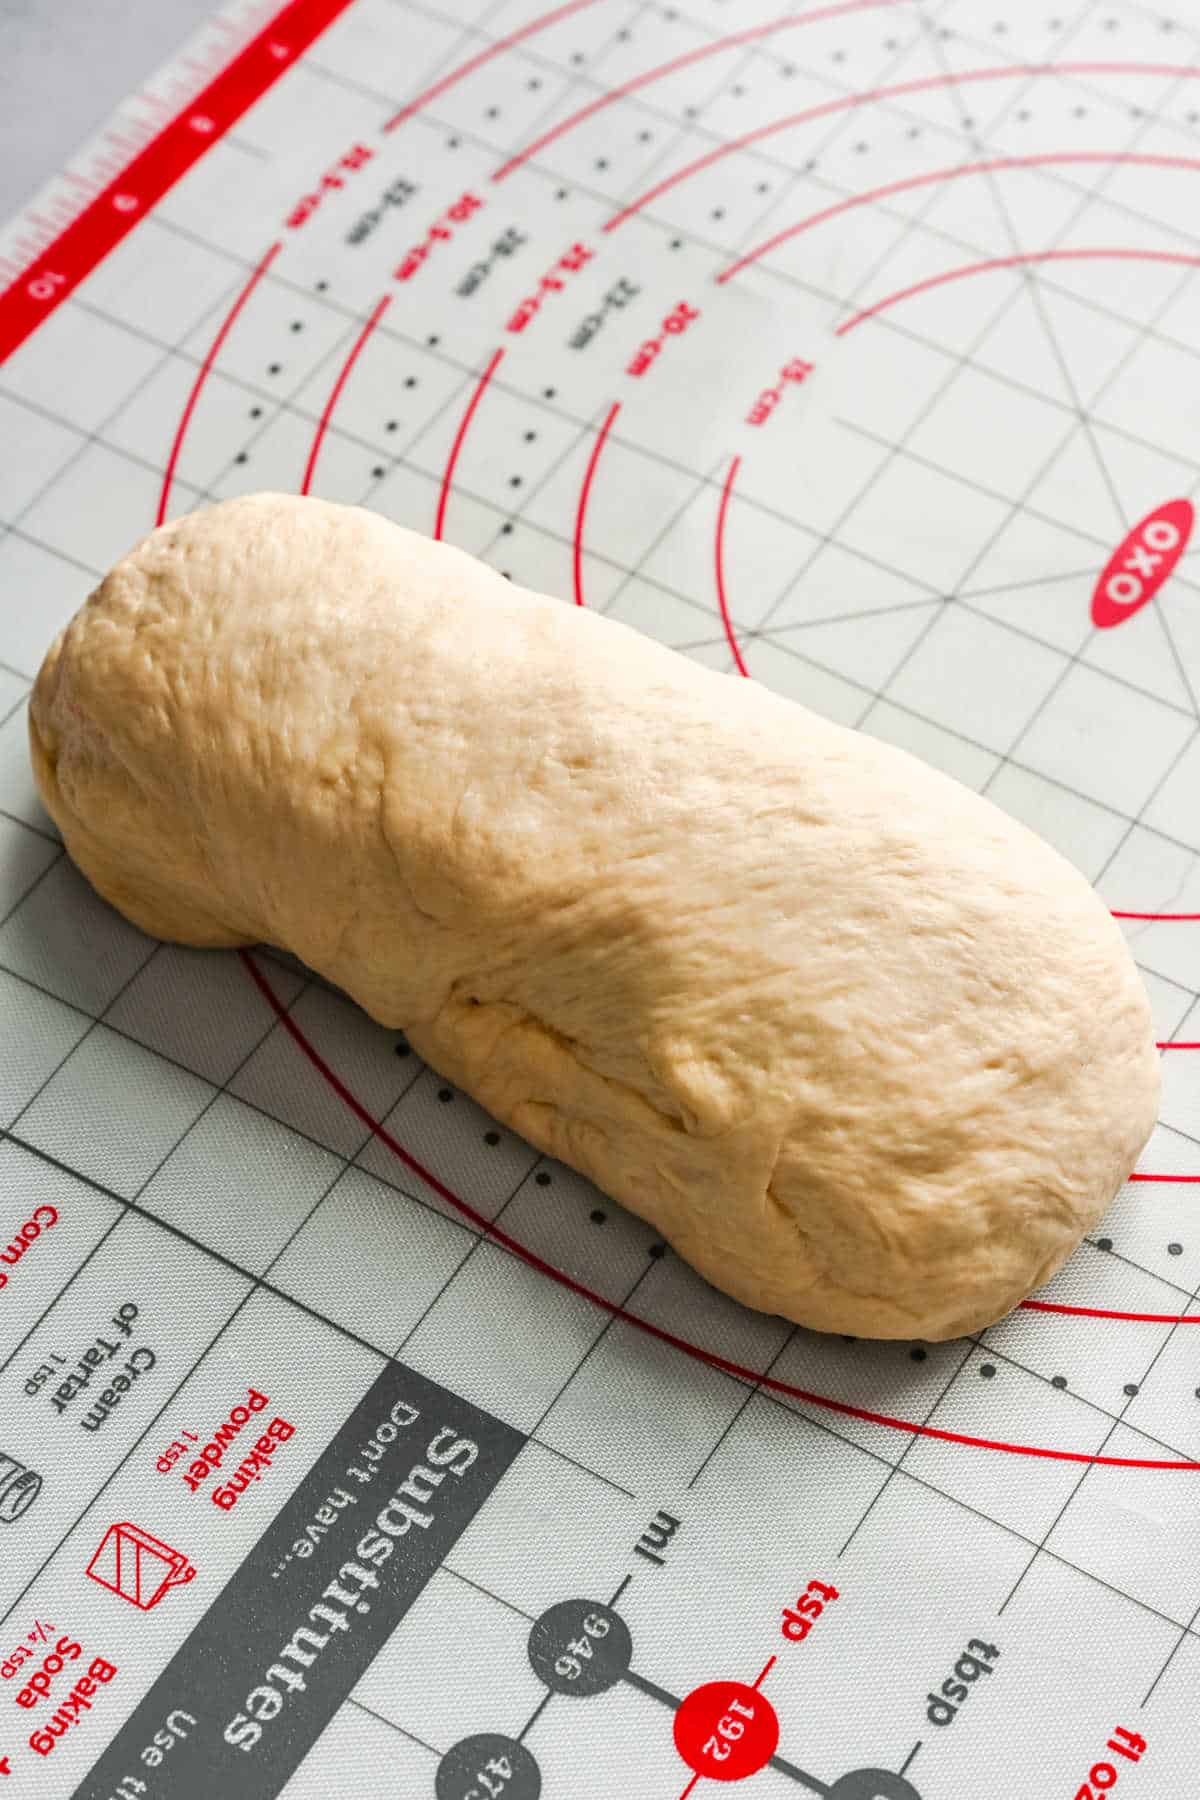 White bread dough rolled into a loaf shape.